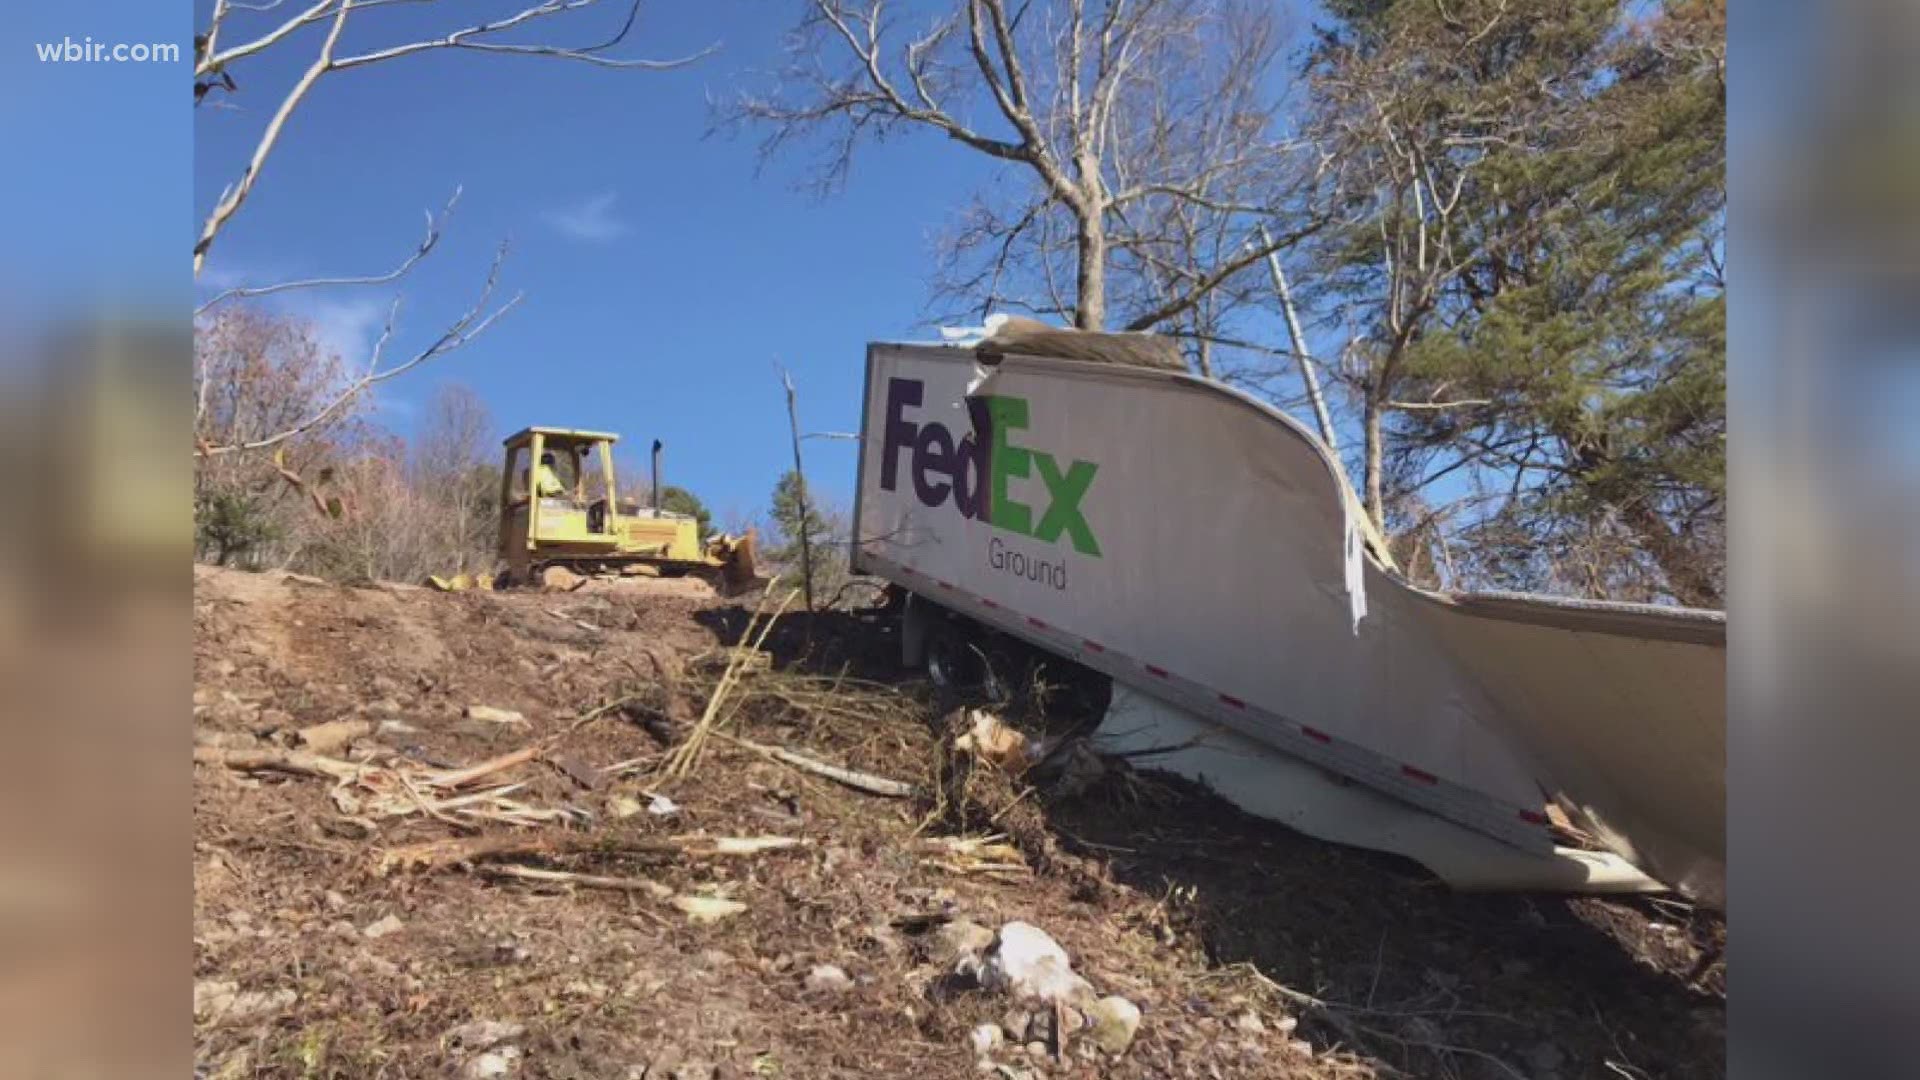 TDOT says a driver and passenger in a Fed-Ex truck are hurt after a crash on I-40 in Roane County.